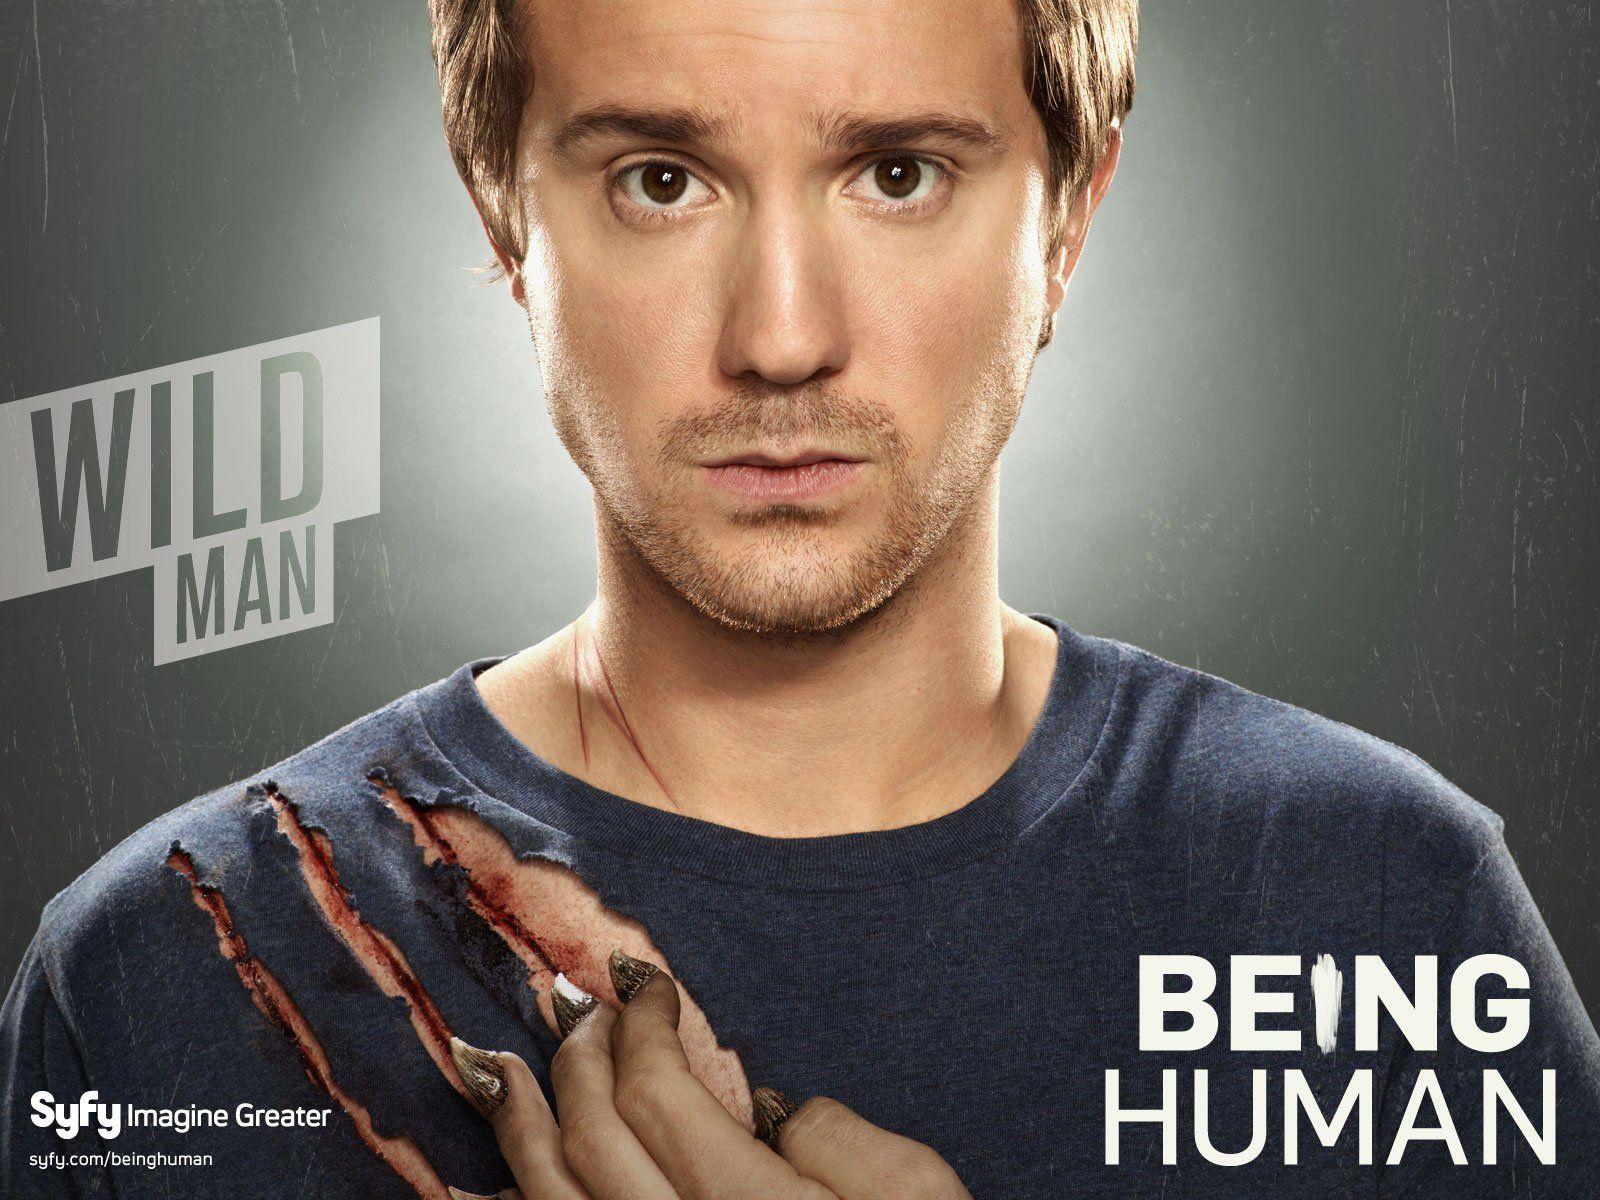 Have you discovered the wonderfulness of watching “Being Human